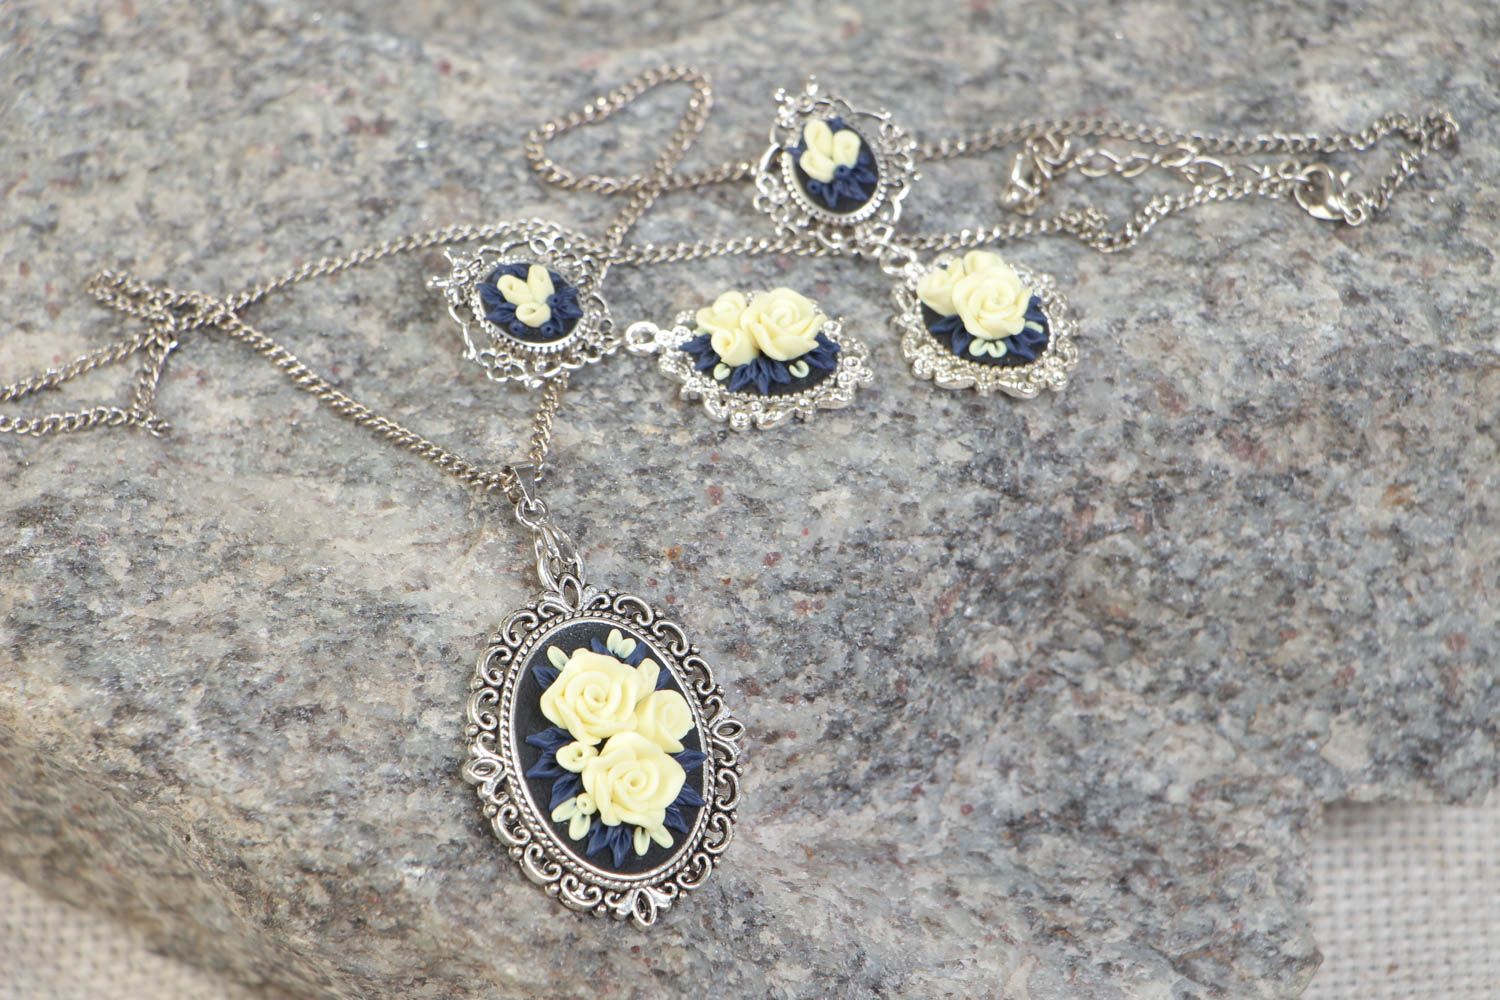 Handmade designer polymer clay jewelry set 2 items necklace and earrings Vanilla Roses photo 1